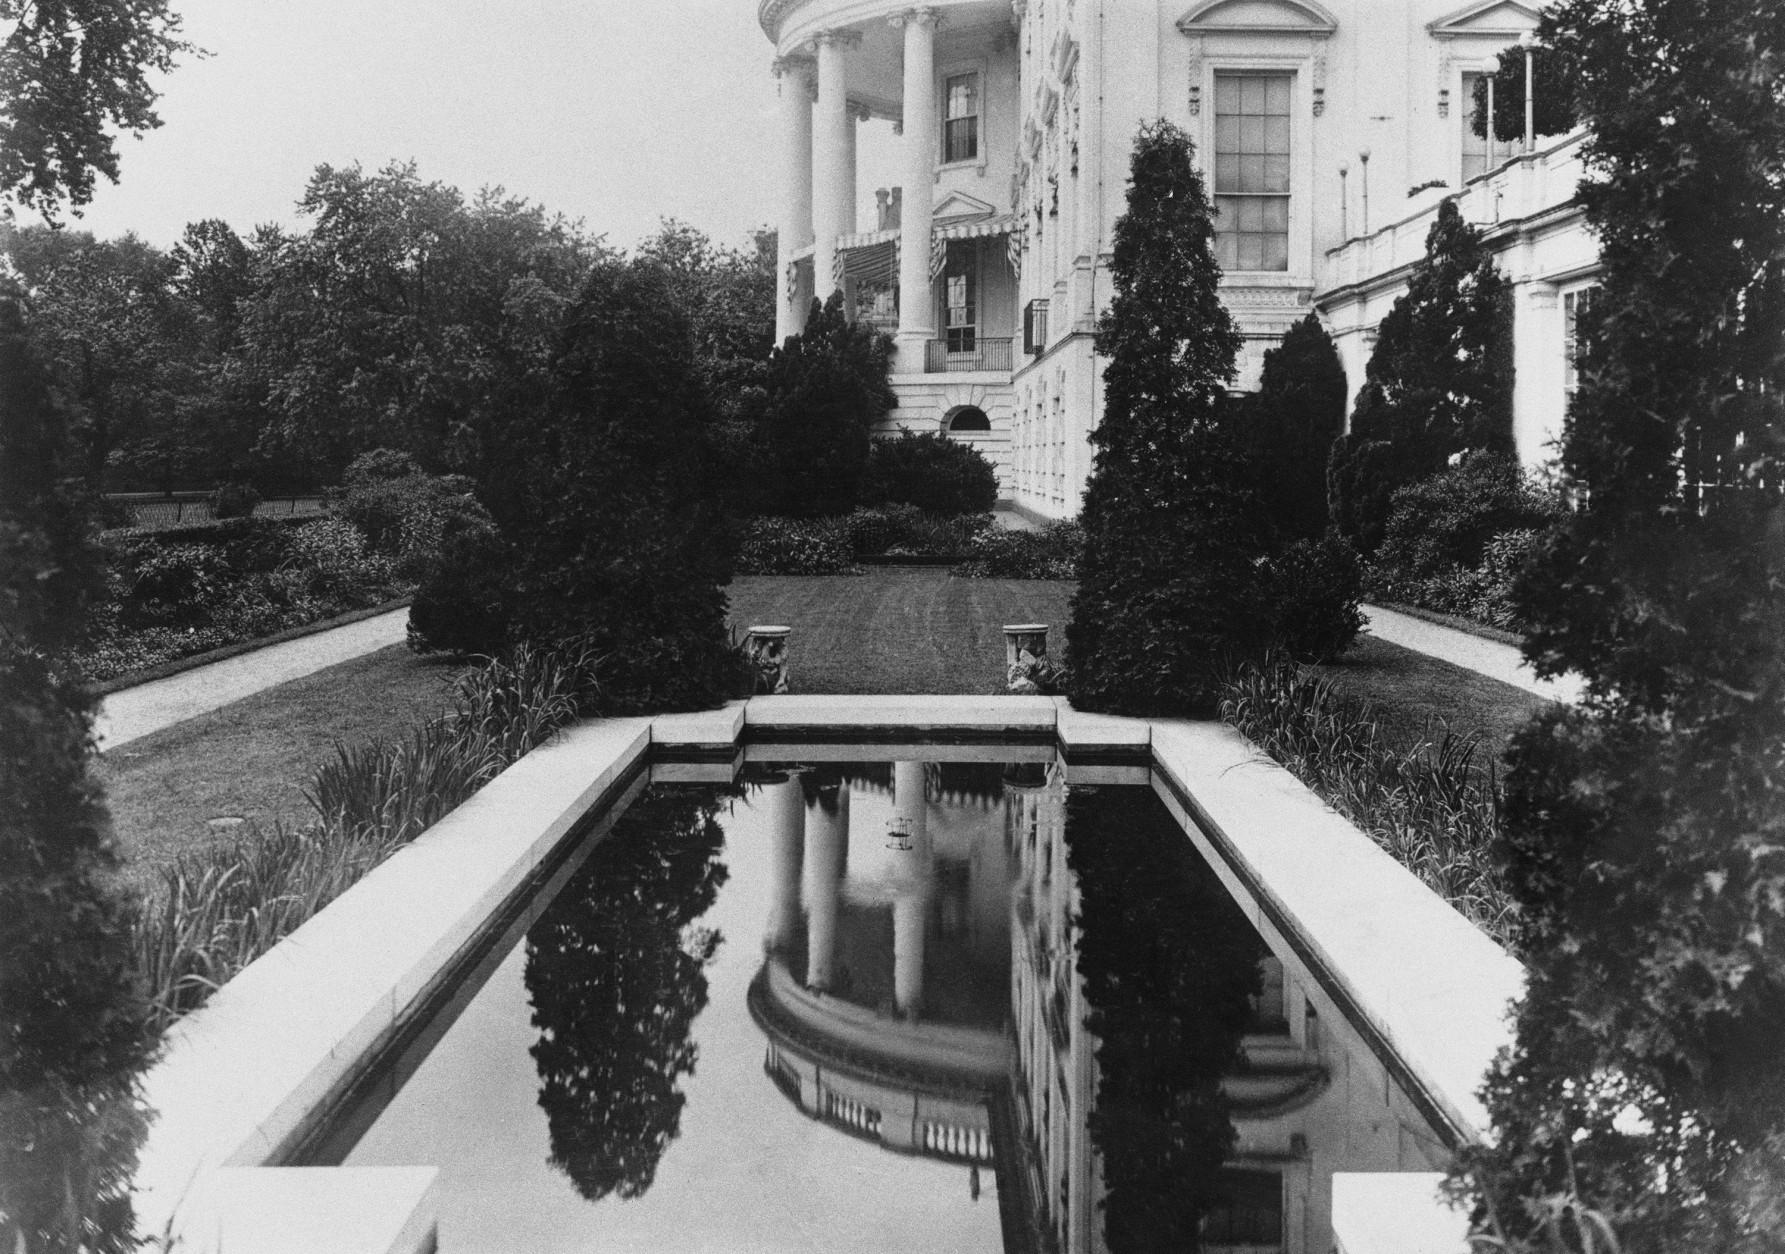 This is a view of the South Portico of the White House, the presidential residence, in Washington, D.C. in 1921. (AP Photo)